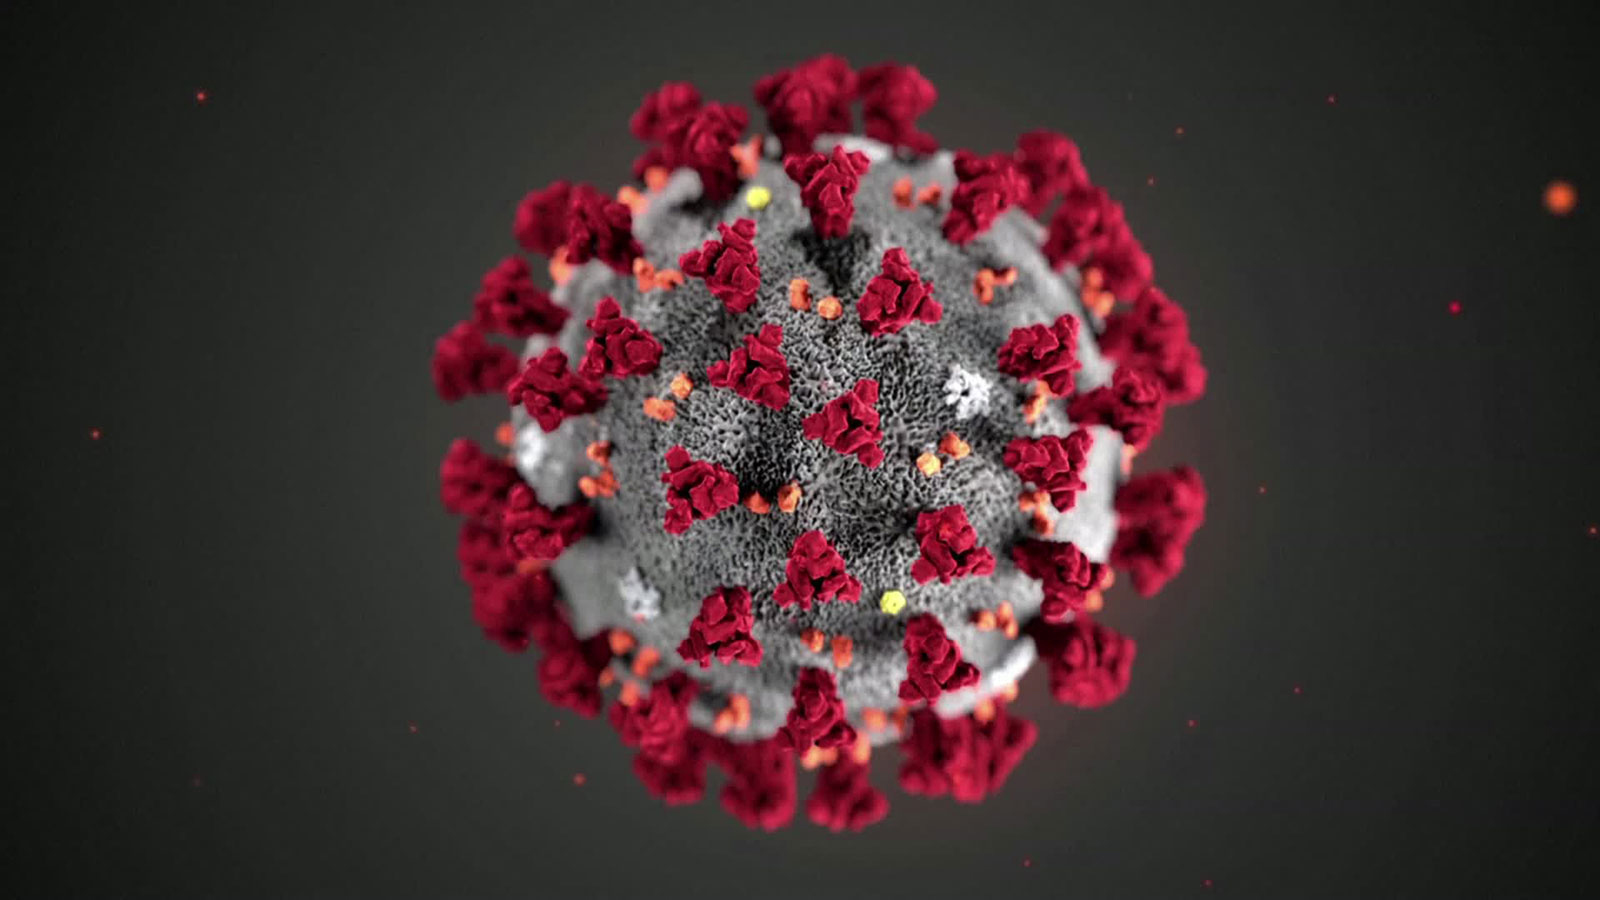 An illustration of the novel coronavirus created at the Centers for Disease Control and Prevention.